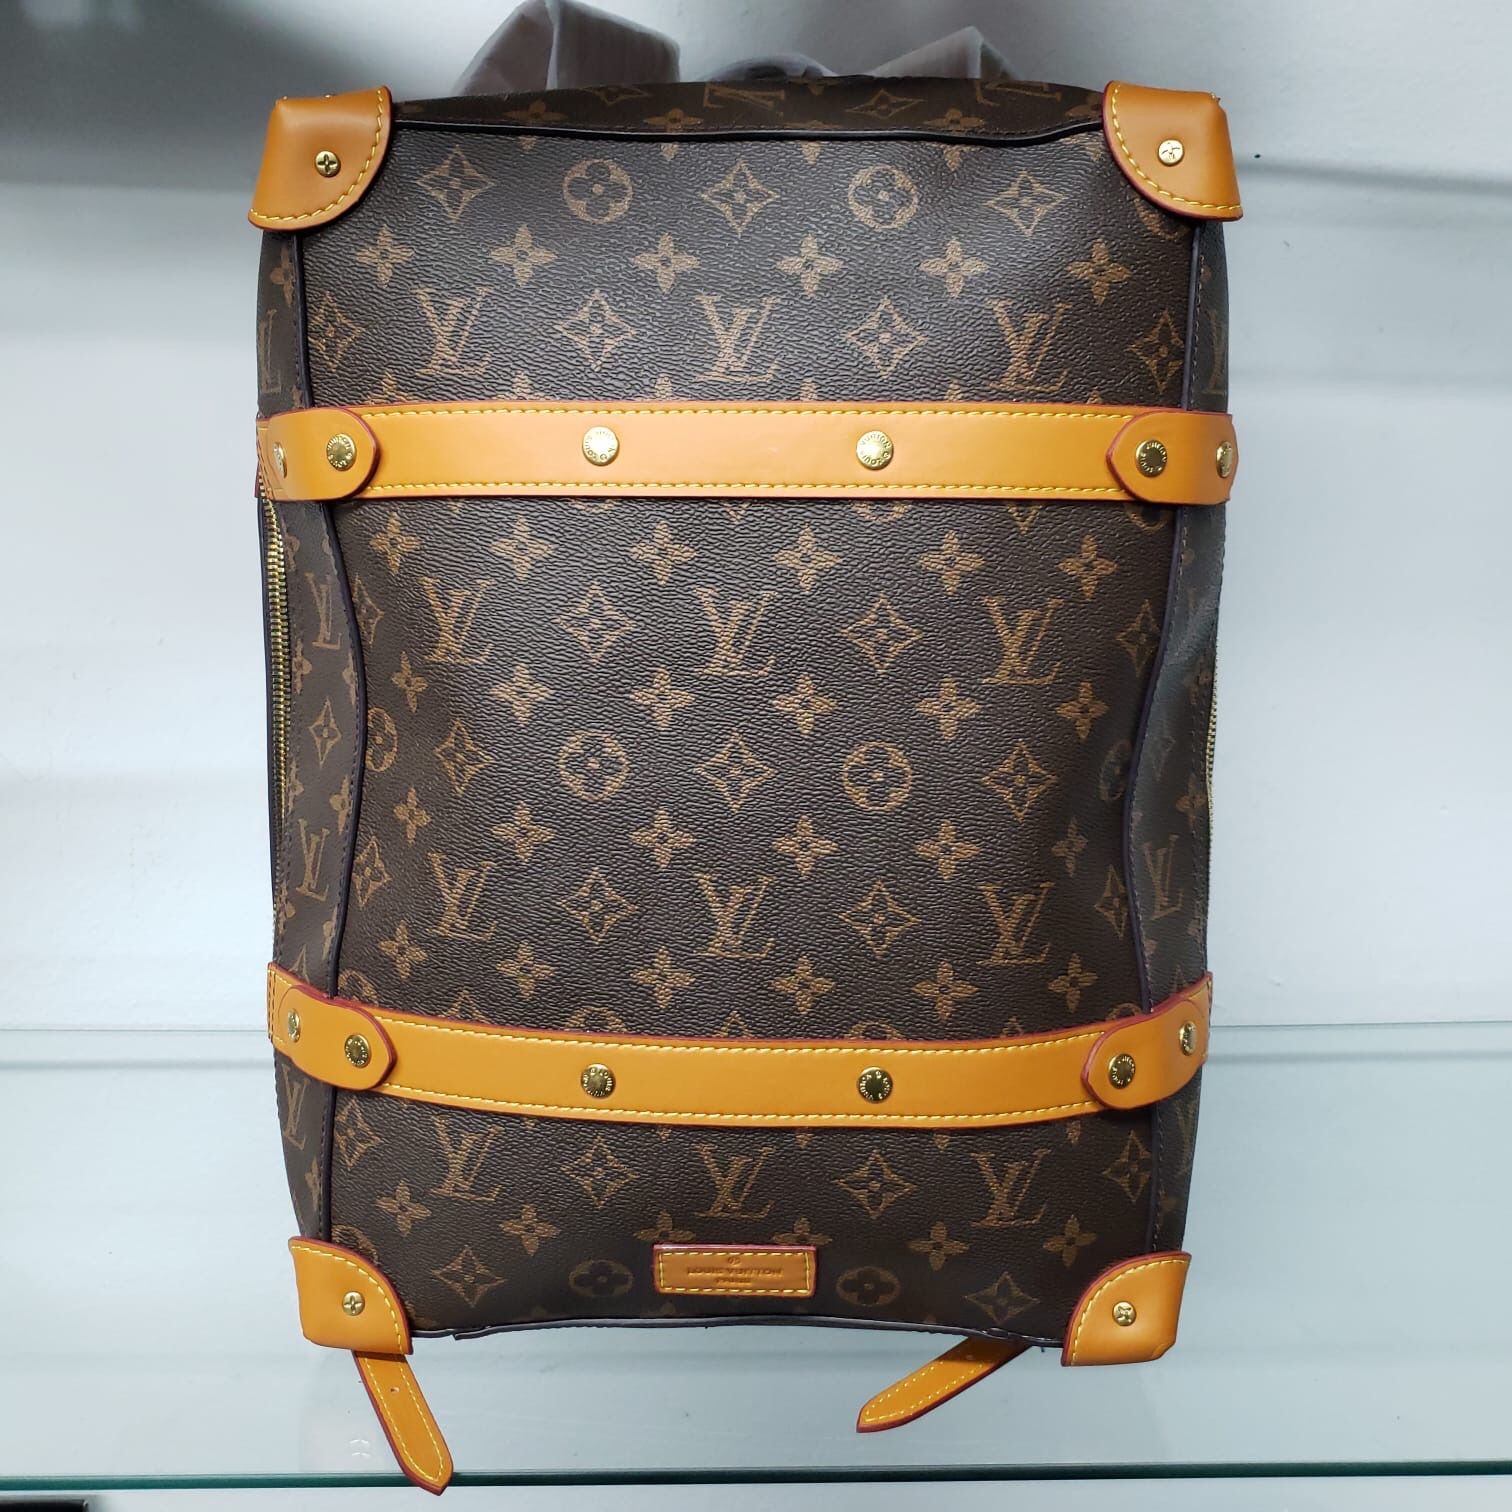 Louis Vuitton Men 3 Level Bag for Sale in Bexley, OH - OfferUp